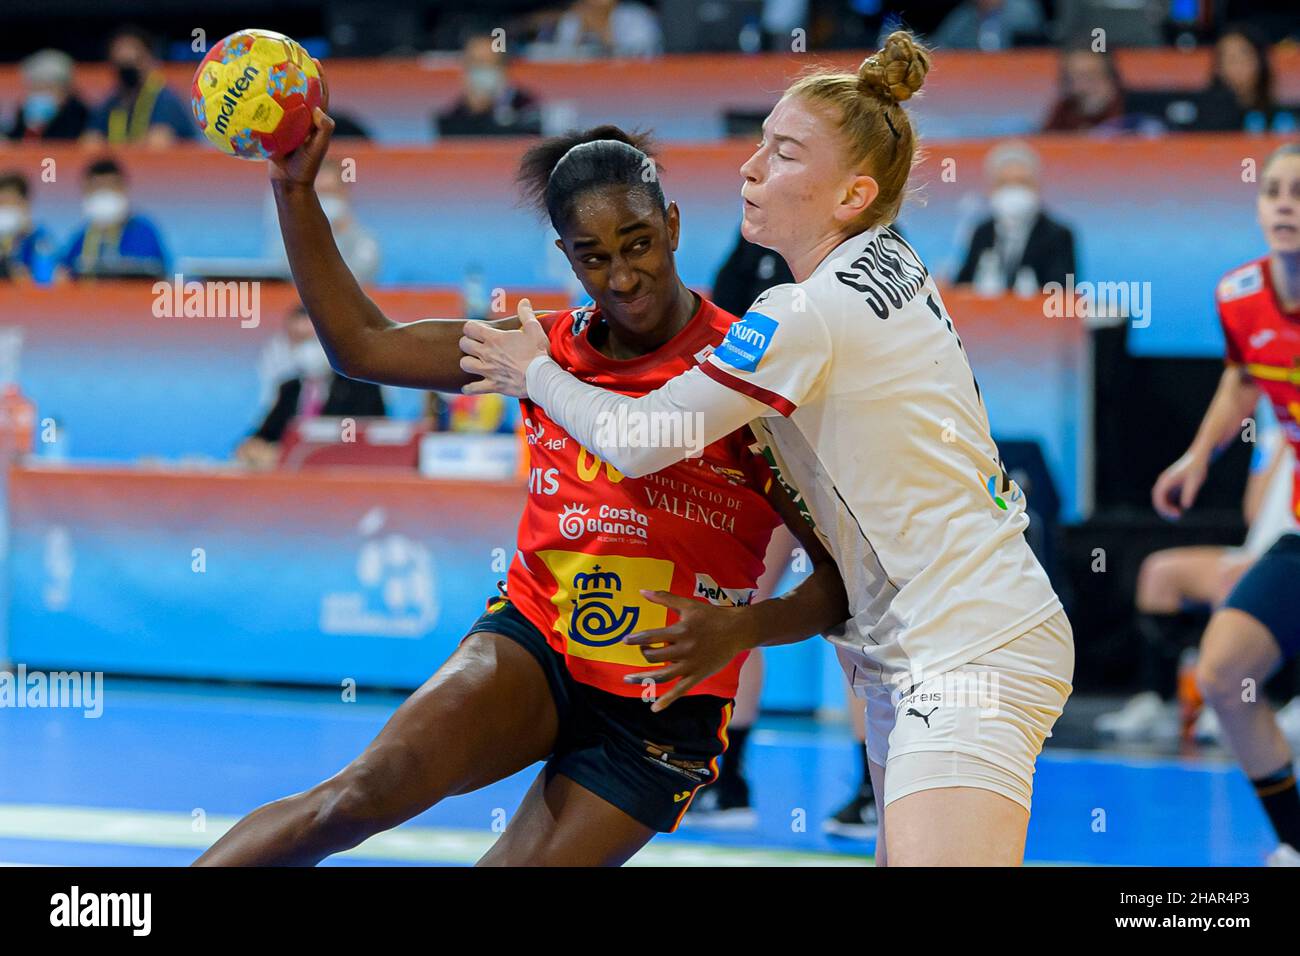 Barcelona, Spain. 14th Dec, 2021. Handball, Women: World Cup, Spain - Germany, Final Round, Quarterfinals: Spain's Alexandrina Cabral Barbosa and Germany's Meike Schmelzer fight for the ball. Credit: Marco Wolf/wolf-sportfoto/dpa/Alamy Live News Stock Photo